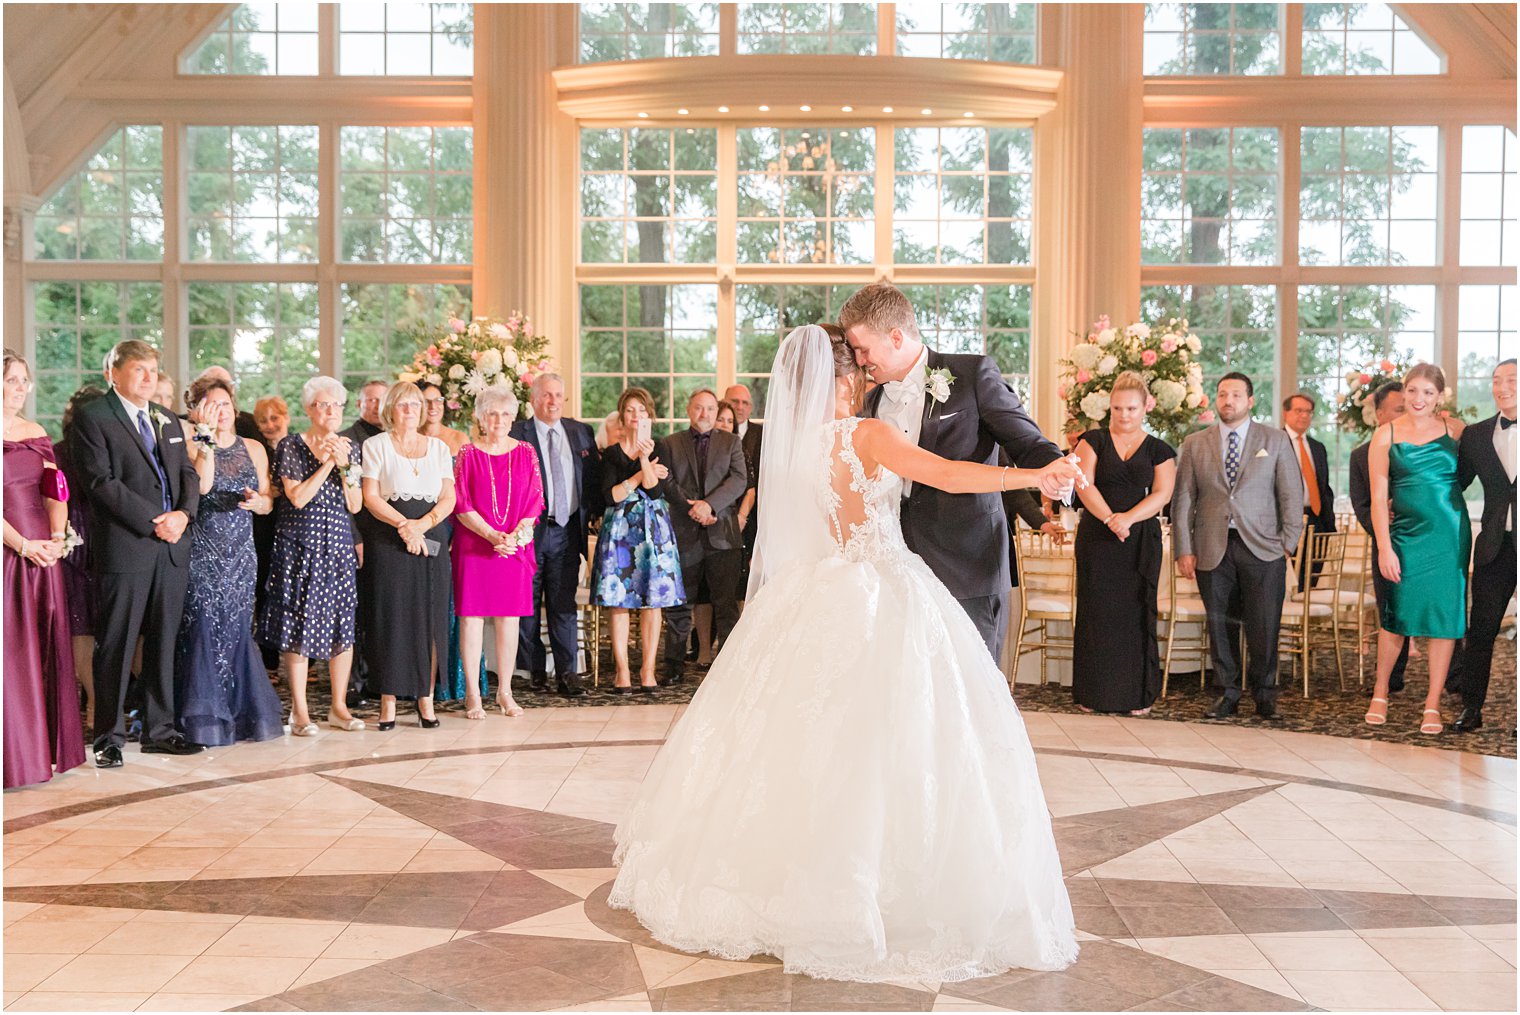 newlyweds have first dance at Ashford Estate with guests around them